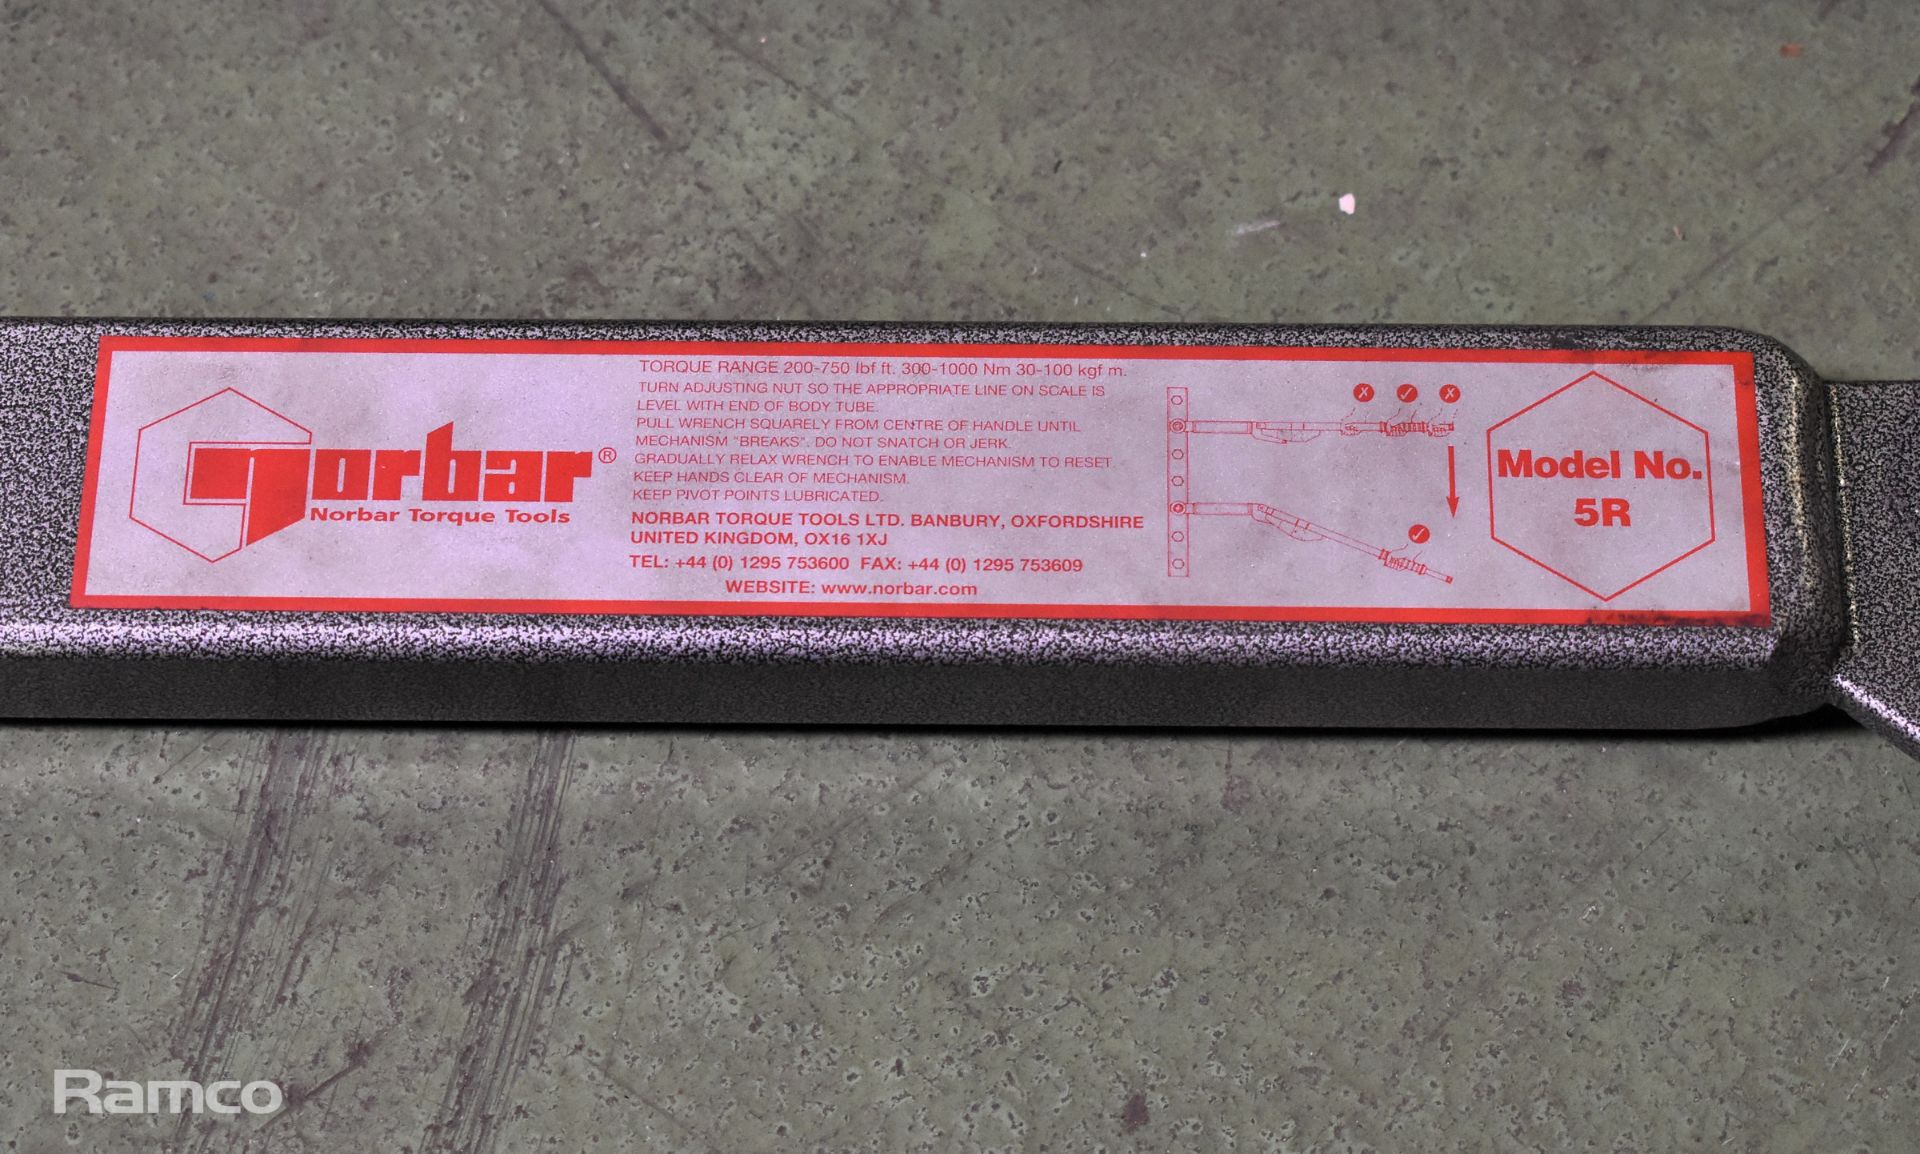 Norbar 5R 3/4 inch drive torque wrench in plastic storage case - 300-1000nm (200-750lbf.ft) - Image 3 of 6